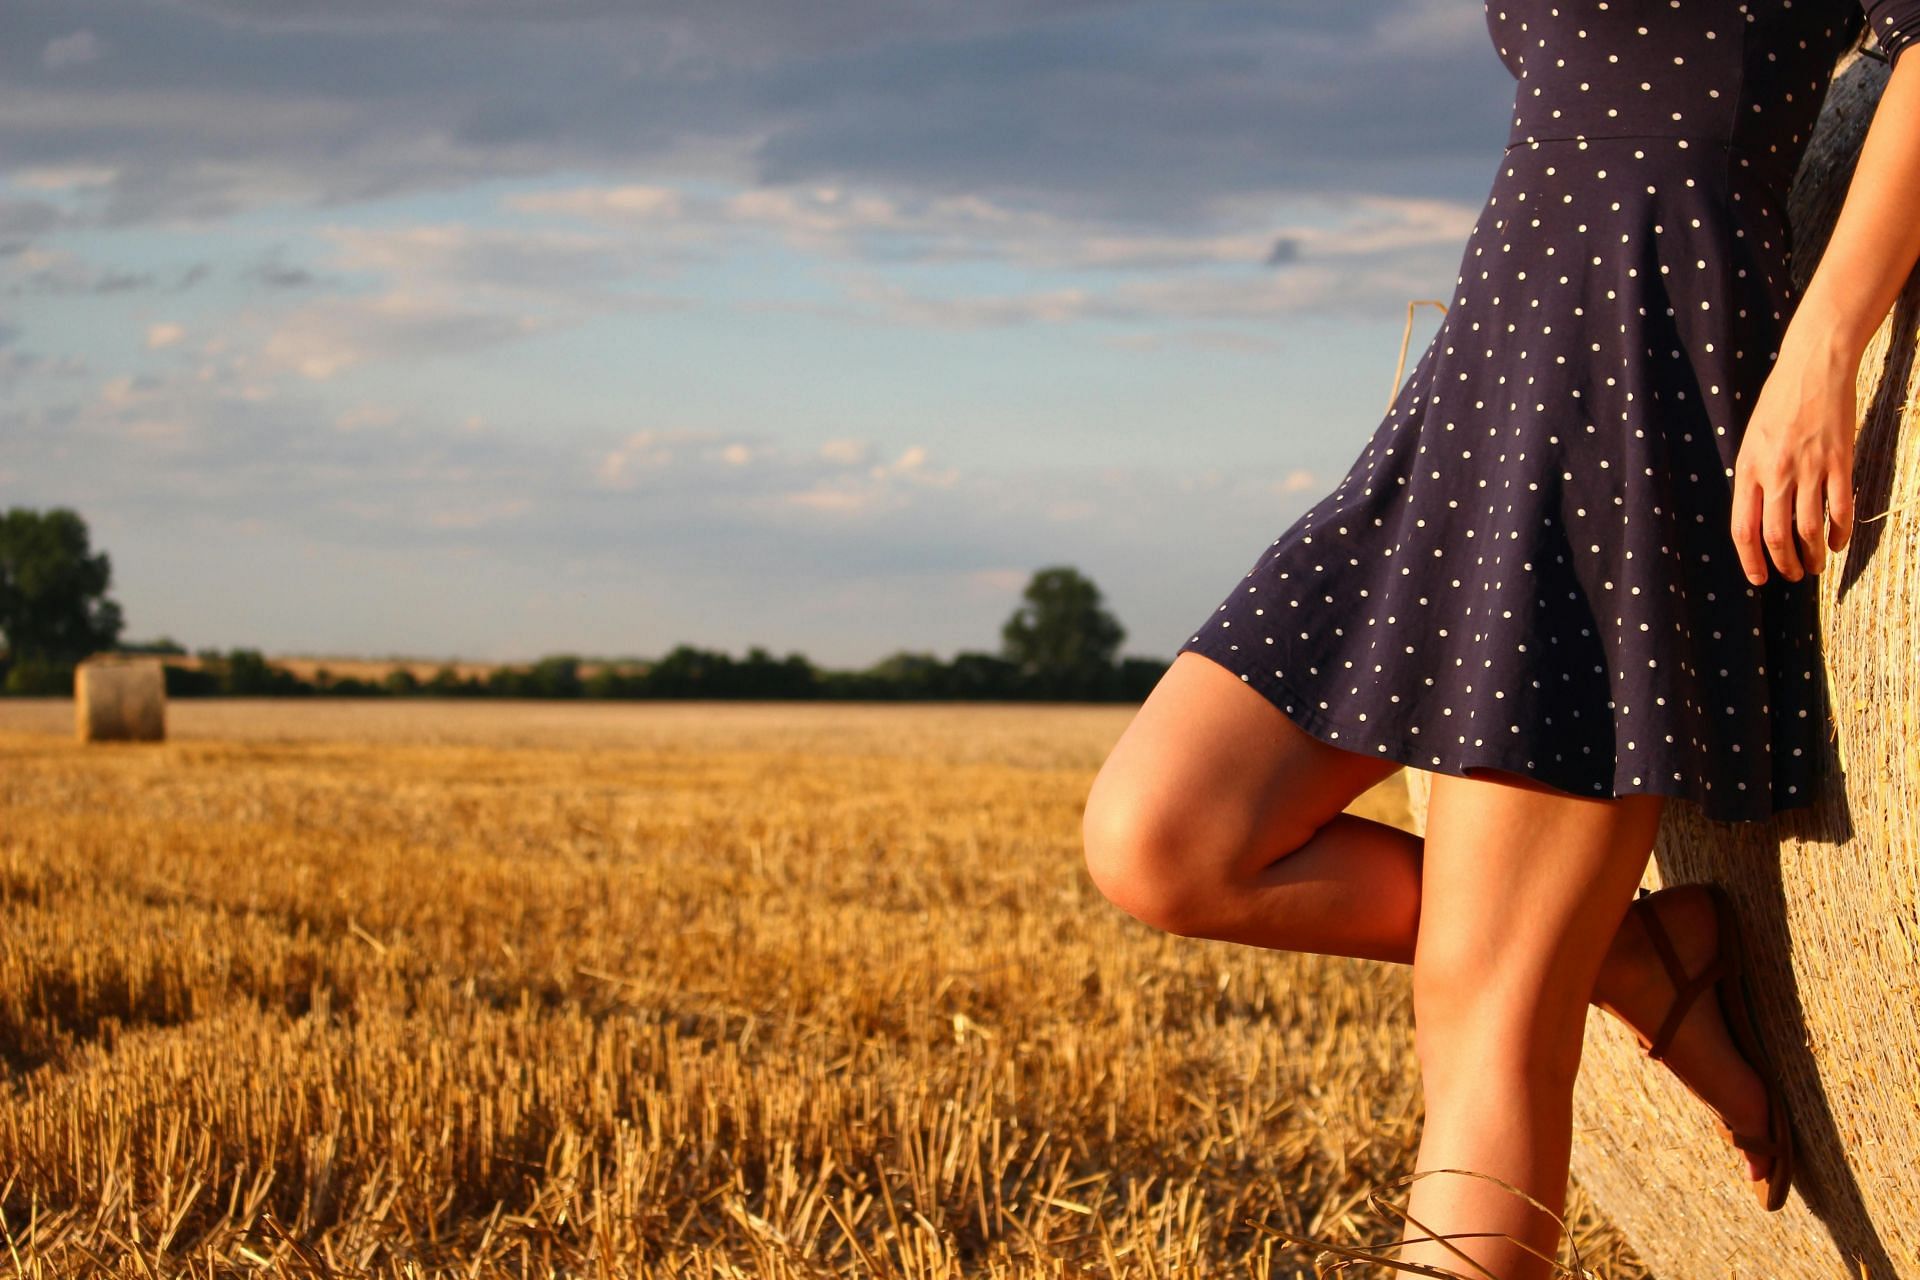 knee arthritis treatment without surgery (image sourced via Pexels / Photo by tofroscom)